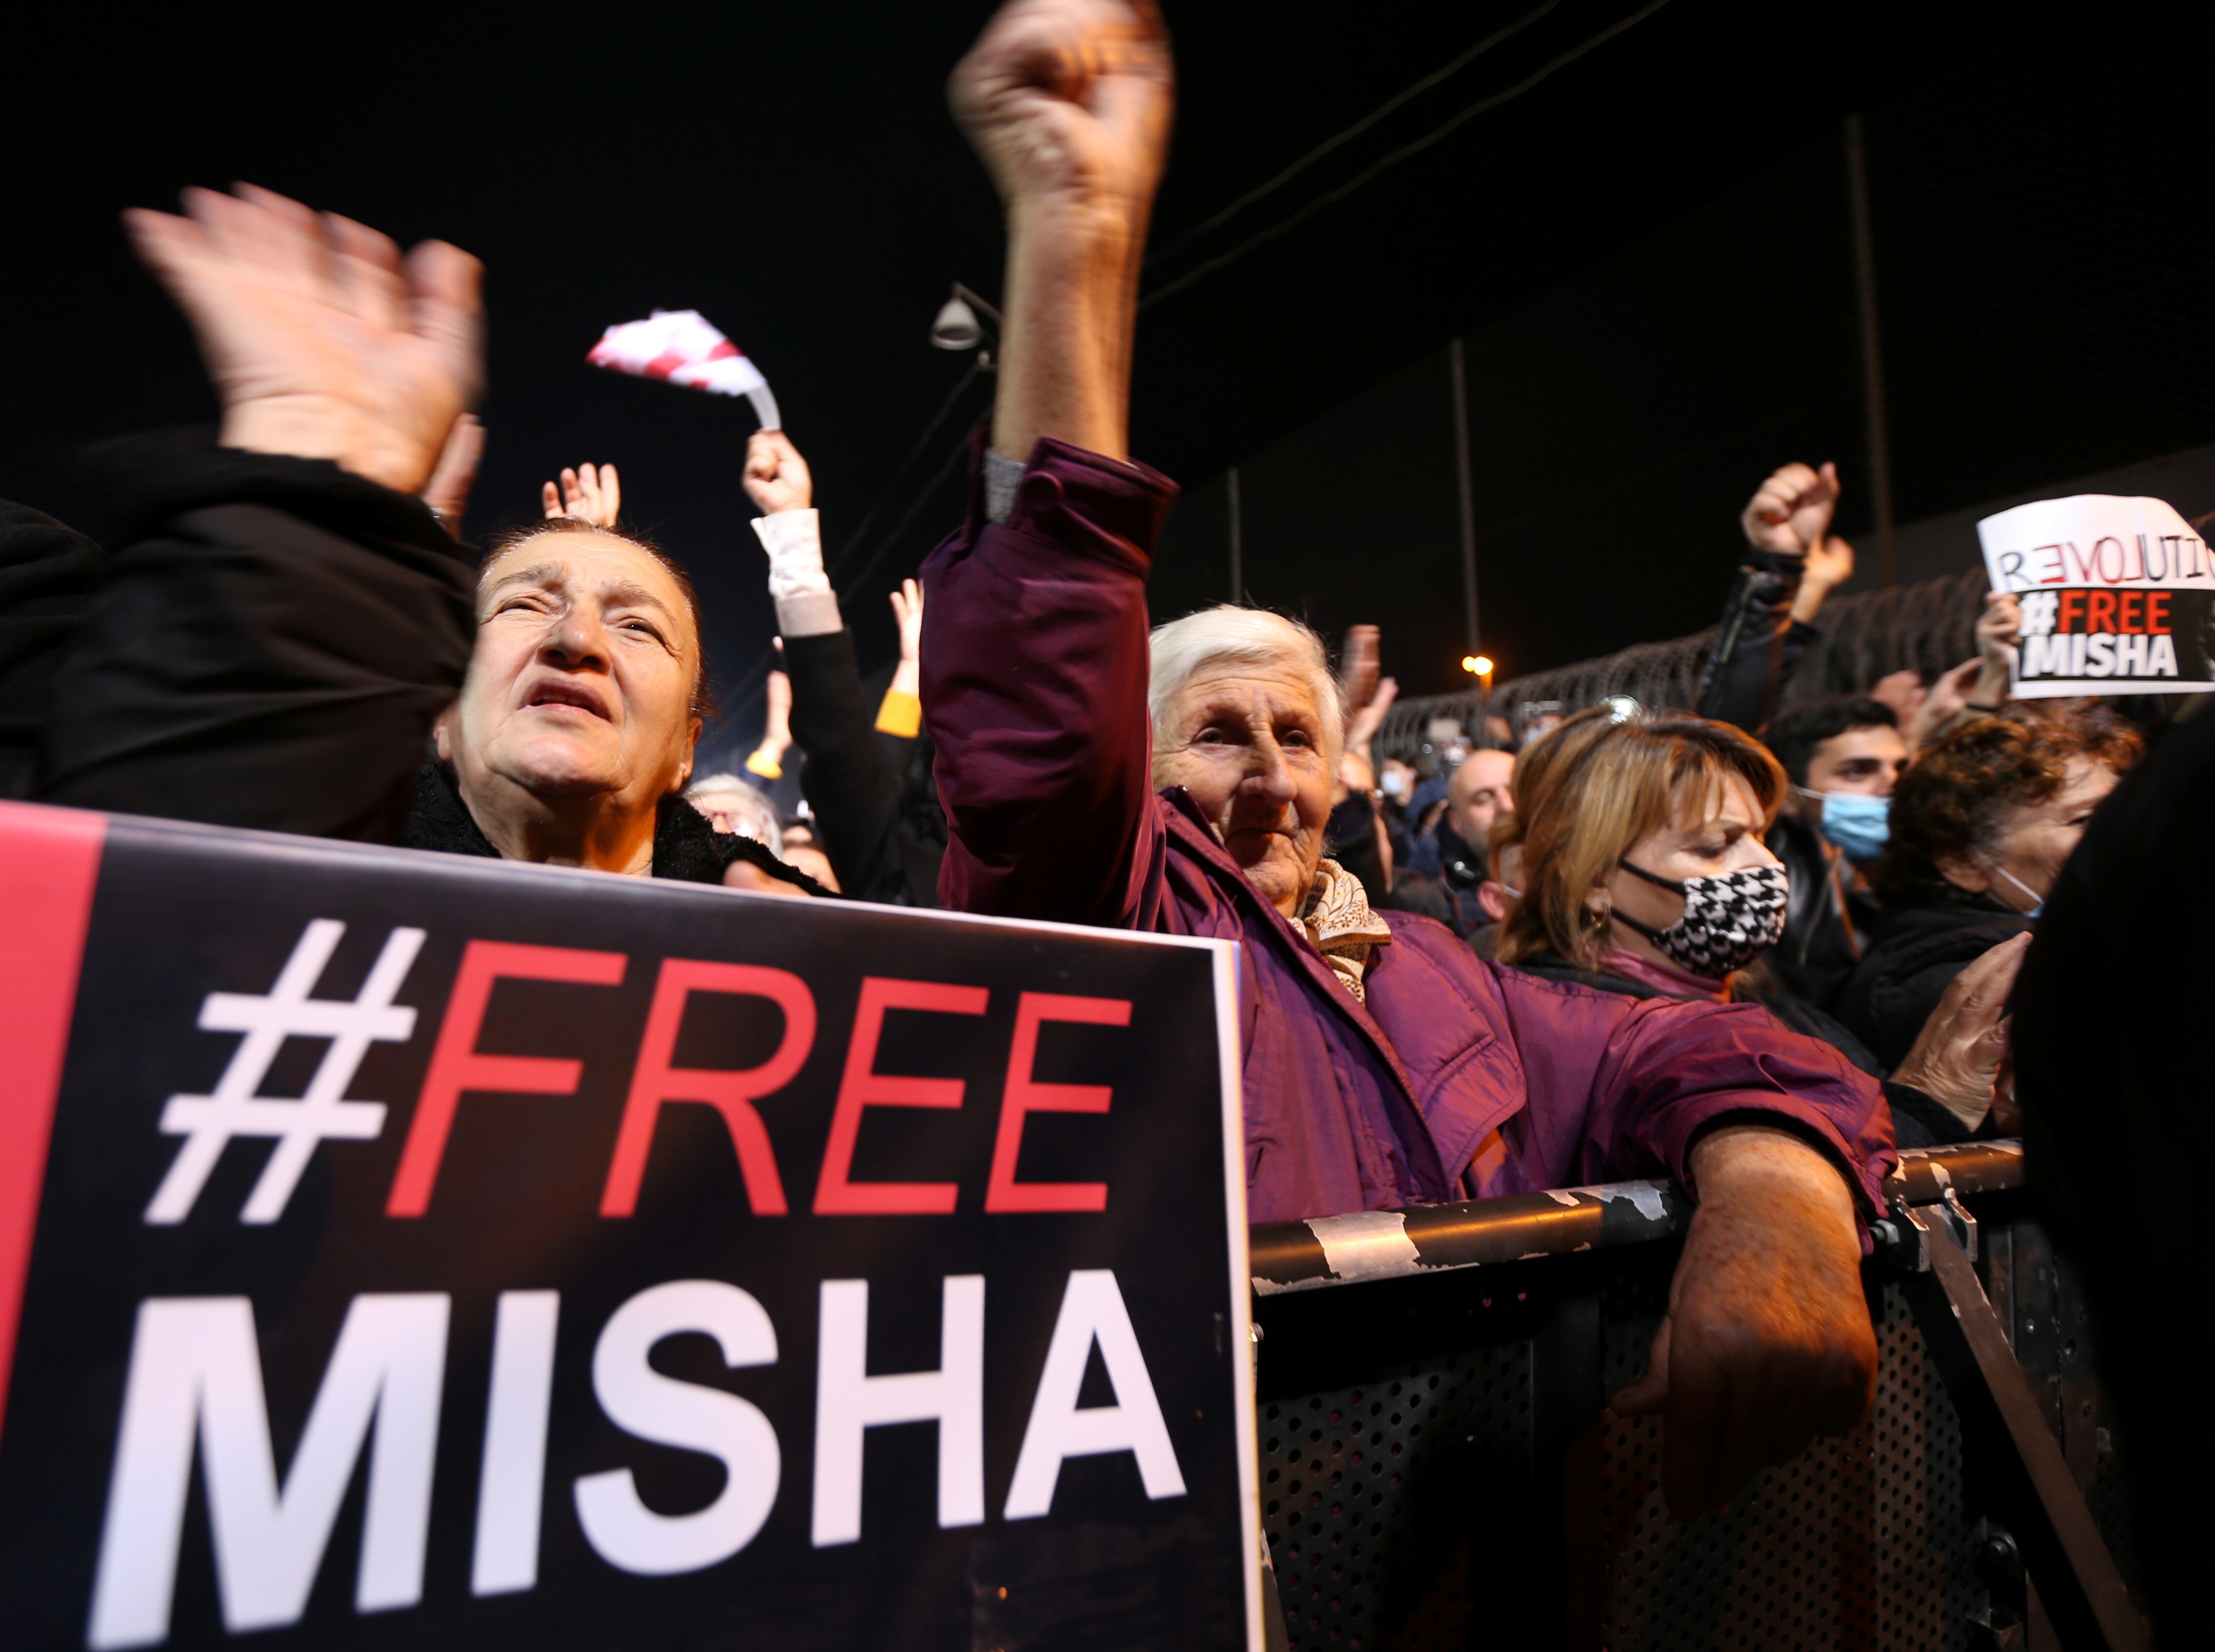 Opposition supporters take part in a rally to demand the release of jailed former Georgian President Mikheil Saakashvili in Rustavi, Georgia on Saturday. Photo: Reuters